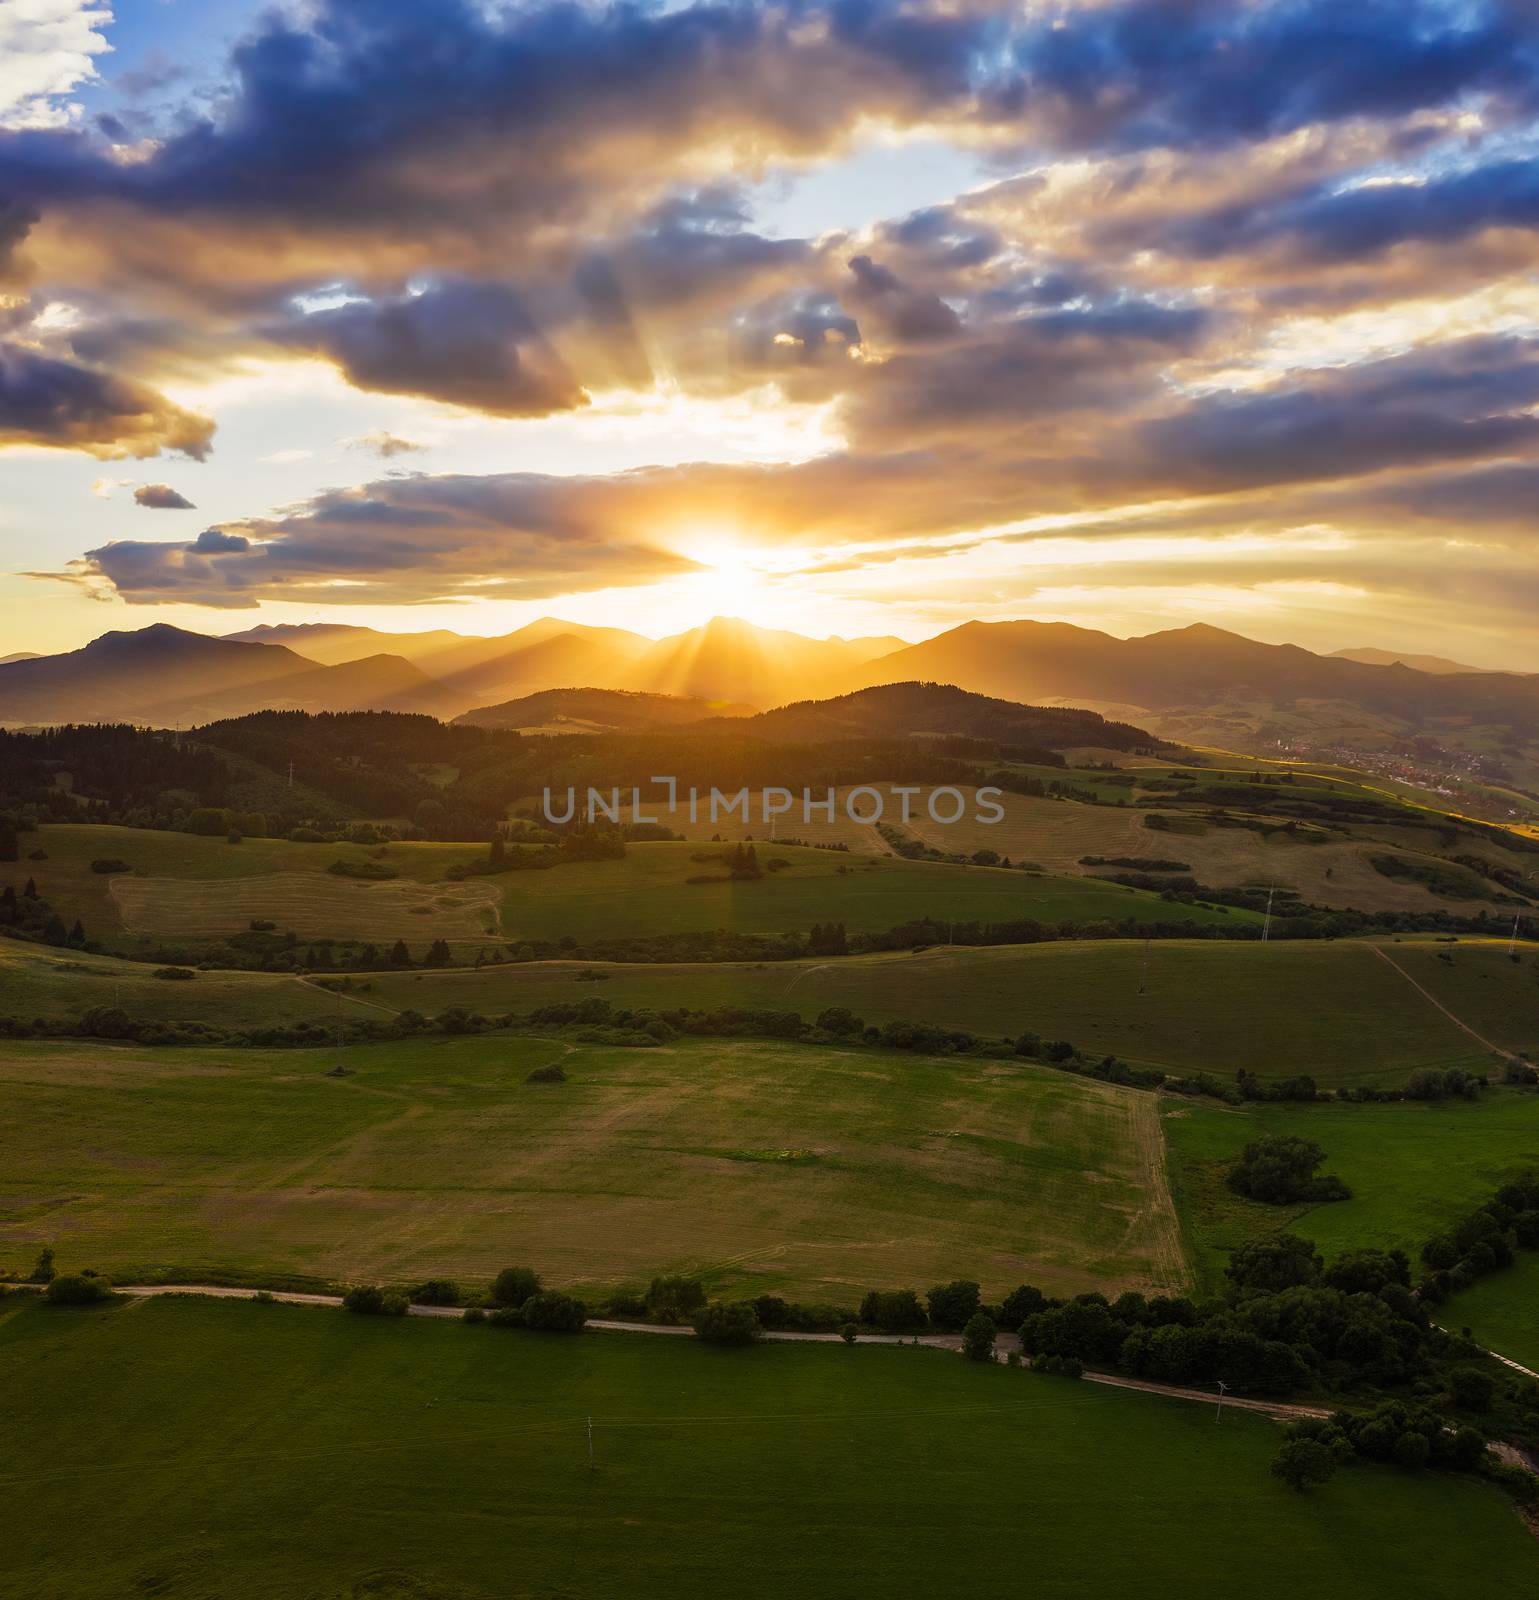 Dramatic sunset above forests and villages of the Liptov region in Slovakia with Great Fatra Mountains in the background